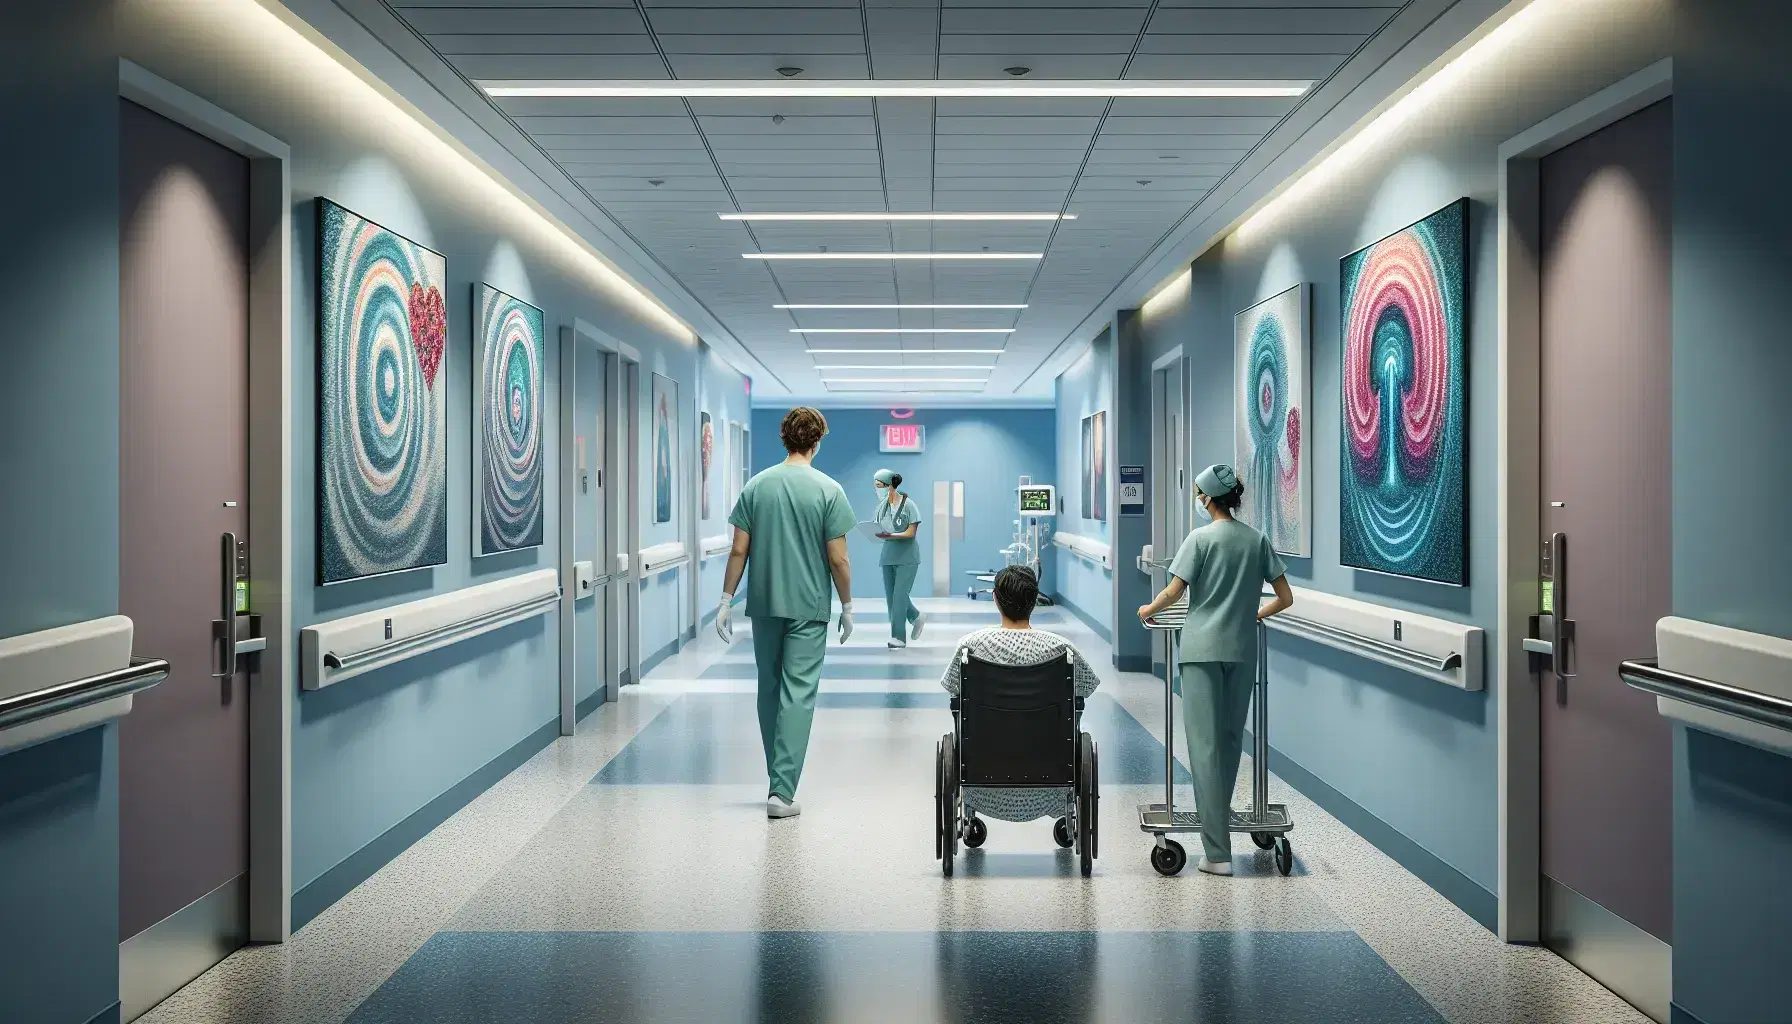 Modern hospital corridor with blue walls, gray terrazzo floor, and bright lighting, featuring art, a nurse with a trolley, a doctor, and a patient in a wheelchair.